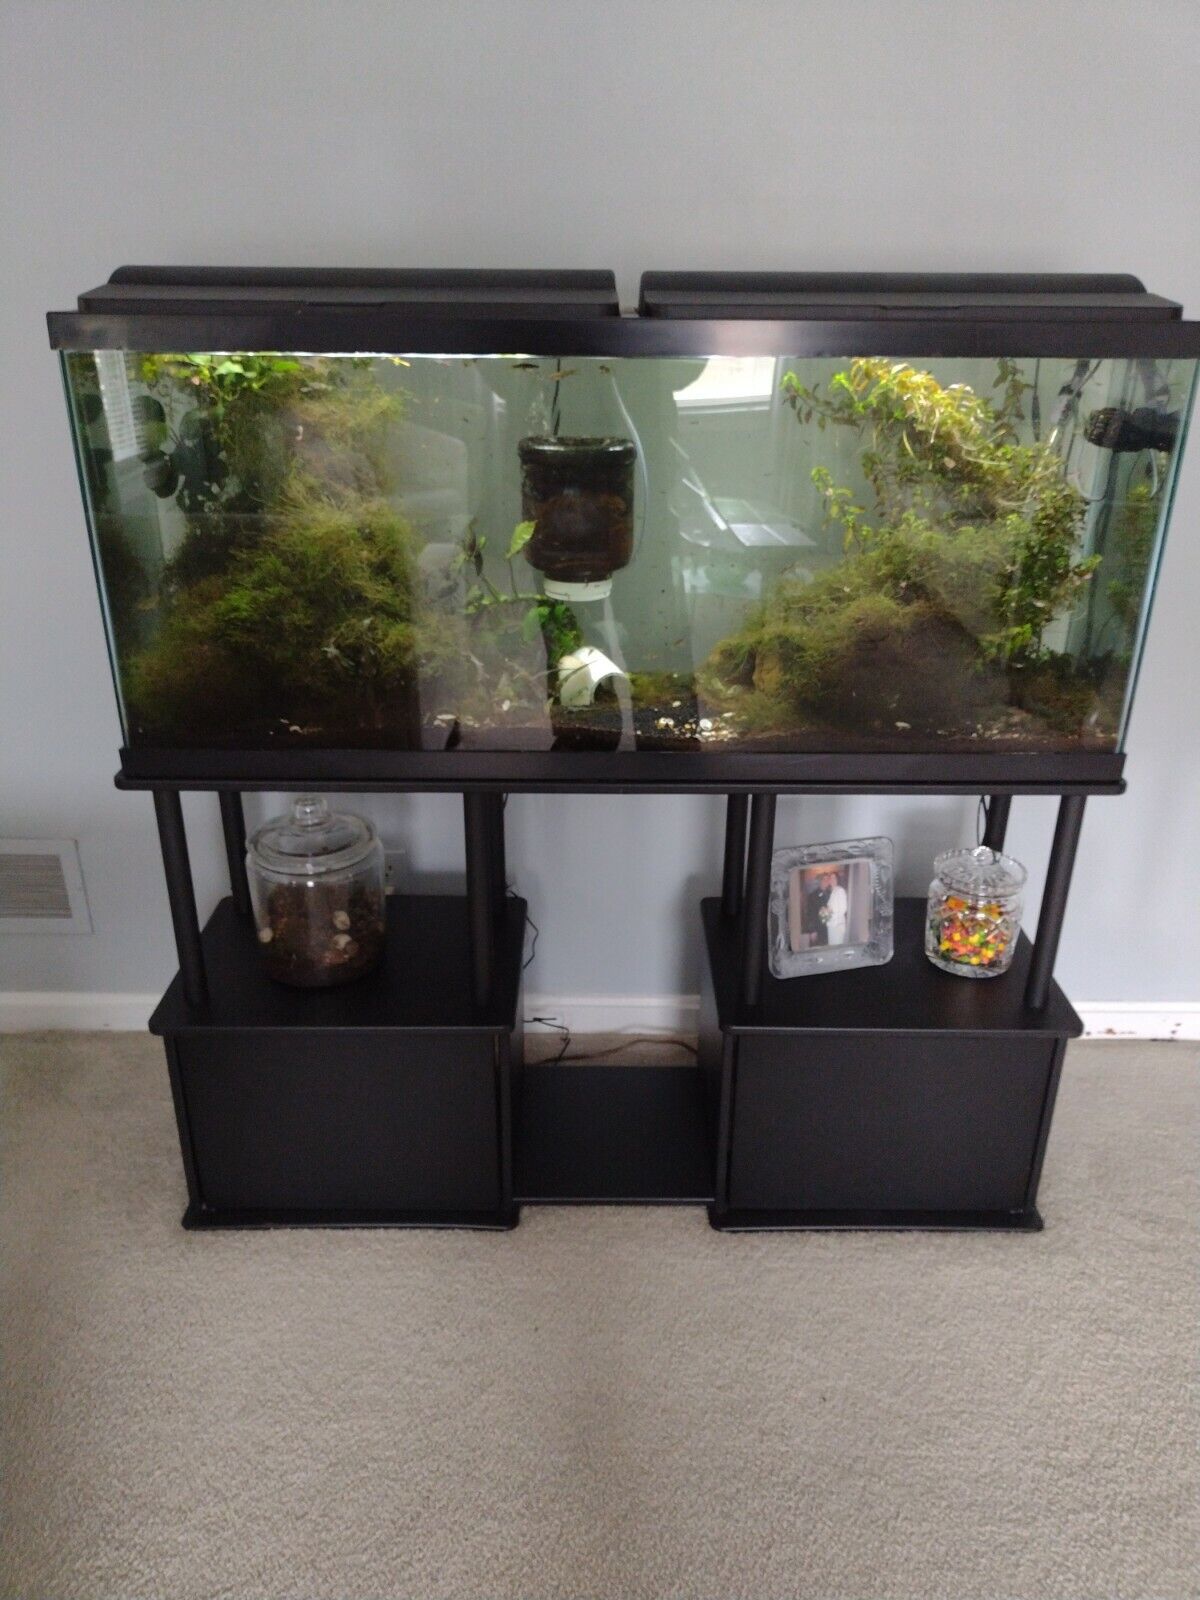 55 Gallon Aquarium with Modern Stand, Hood, LED Lights, and Heater